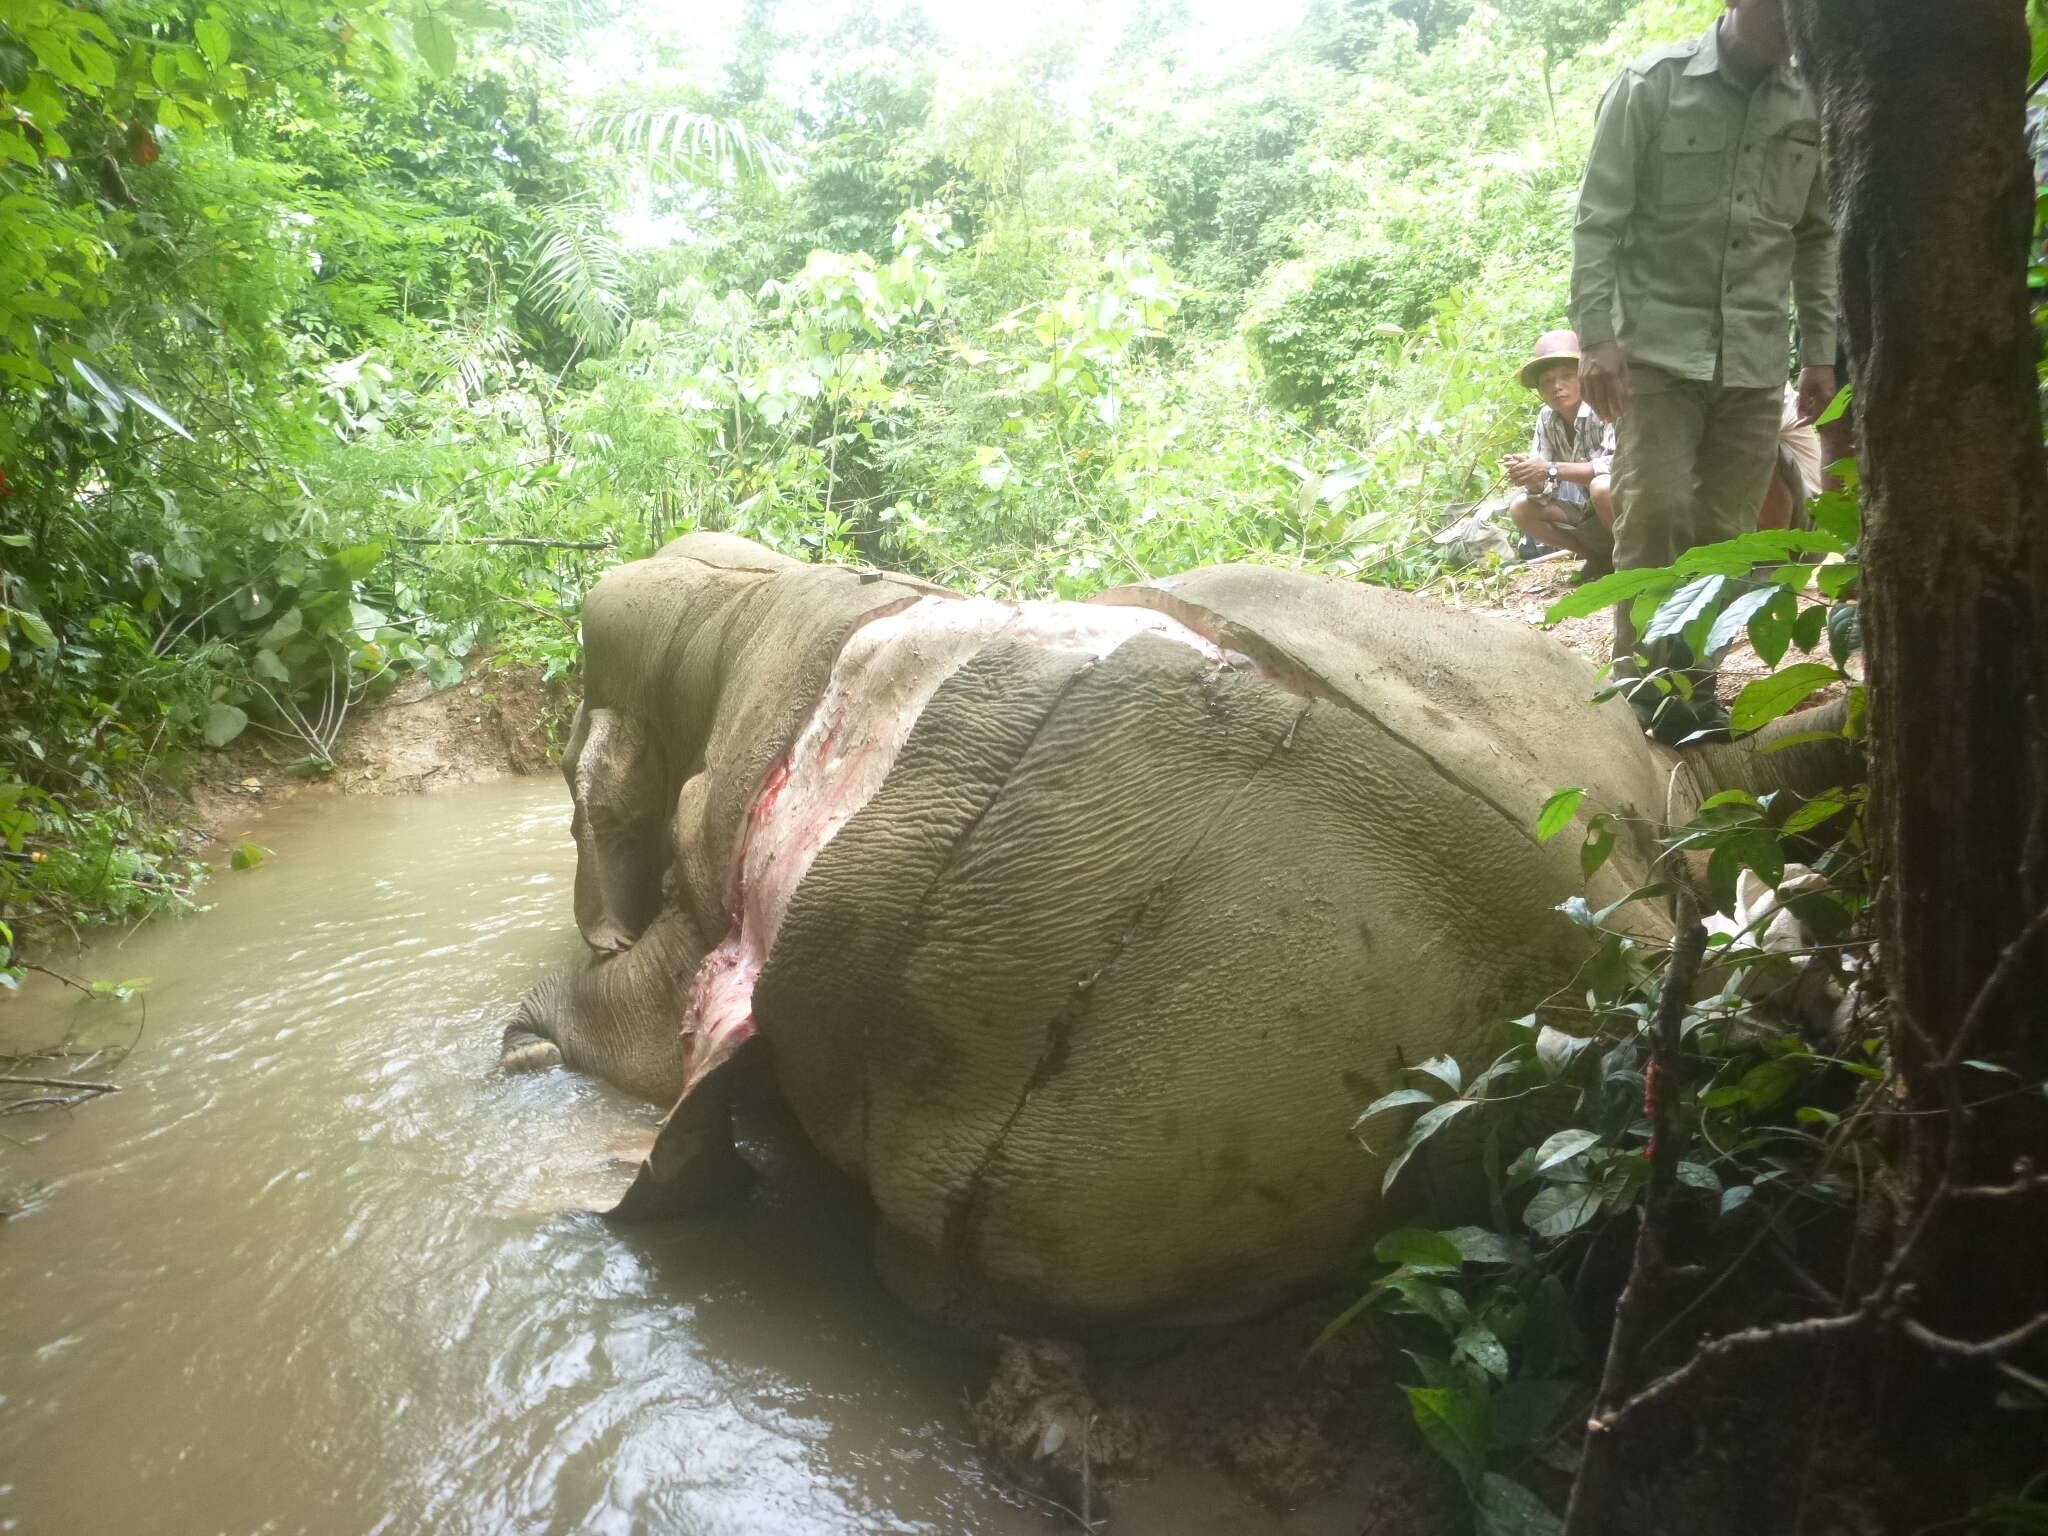 Elephant victimized by skin trade